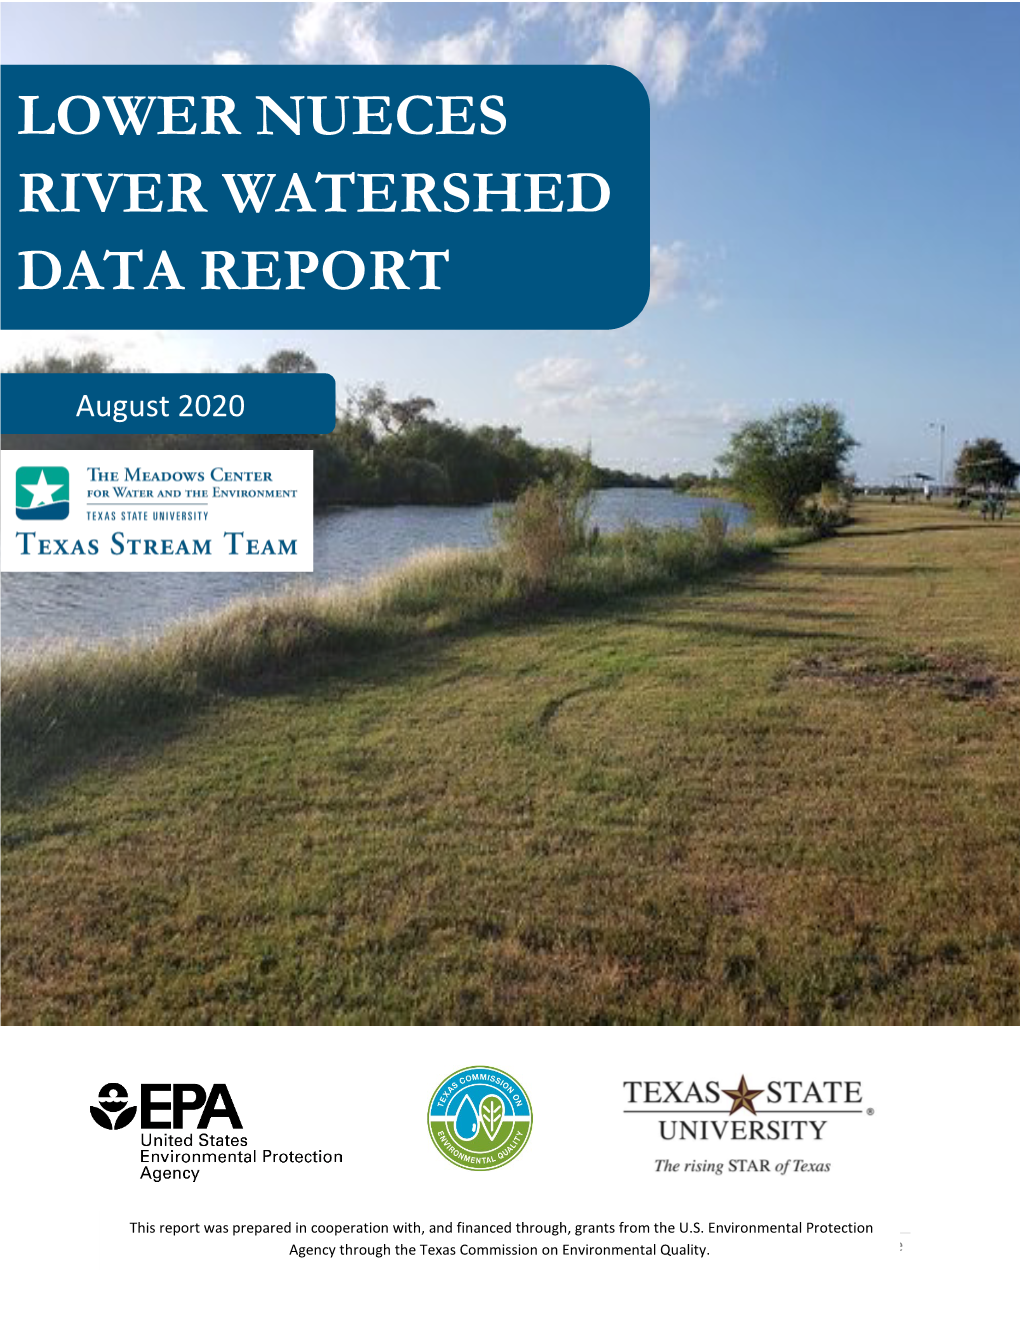 Lower Nueces River Watershed Data Report